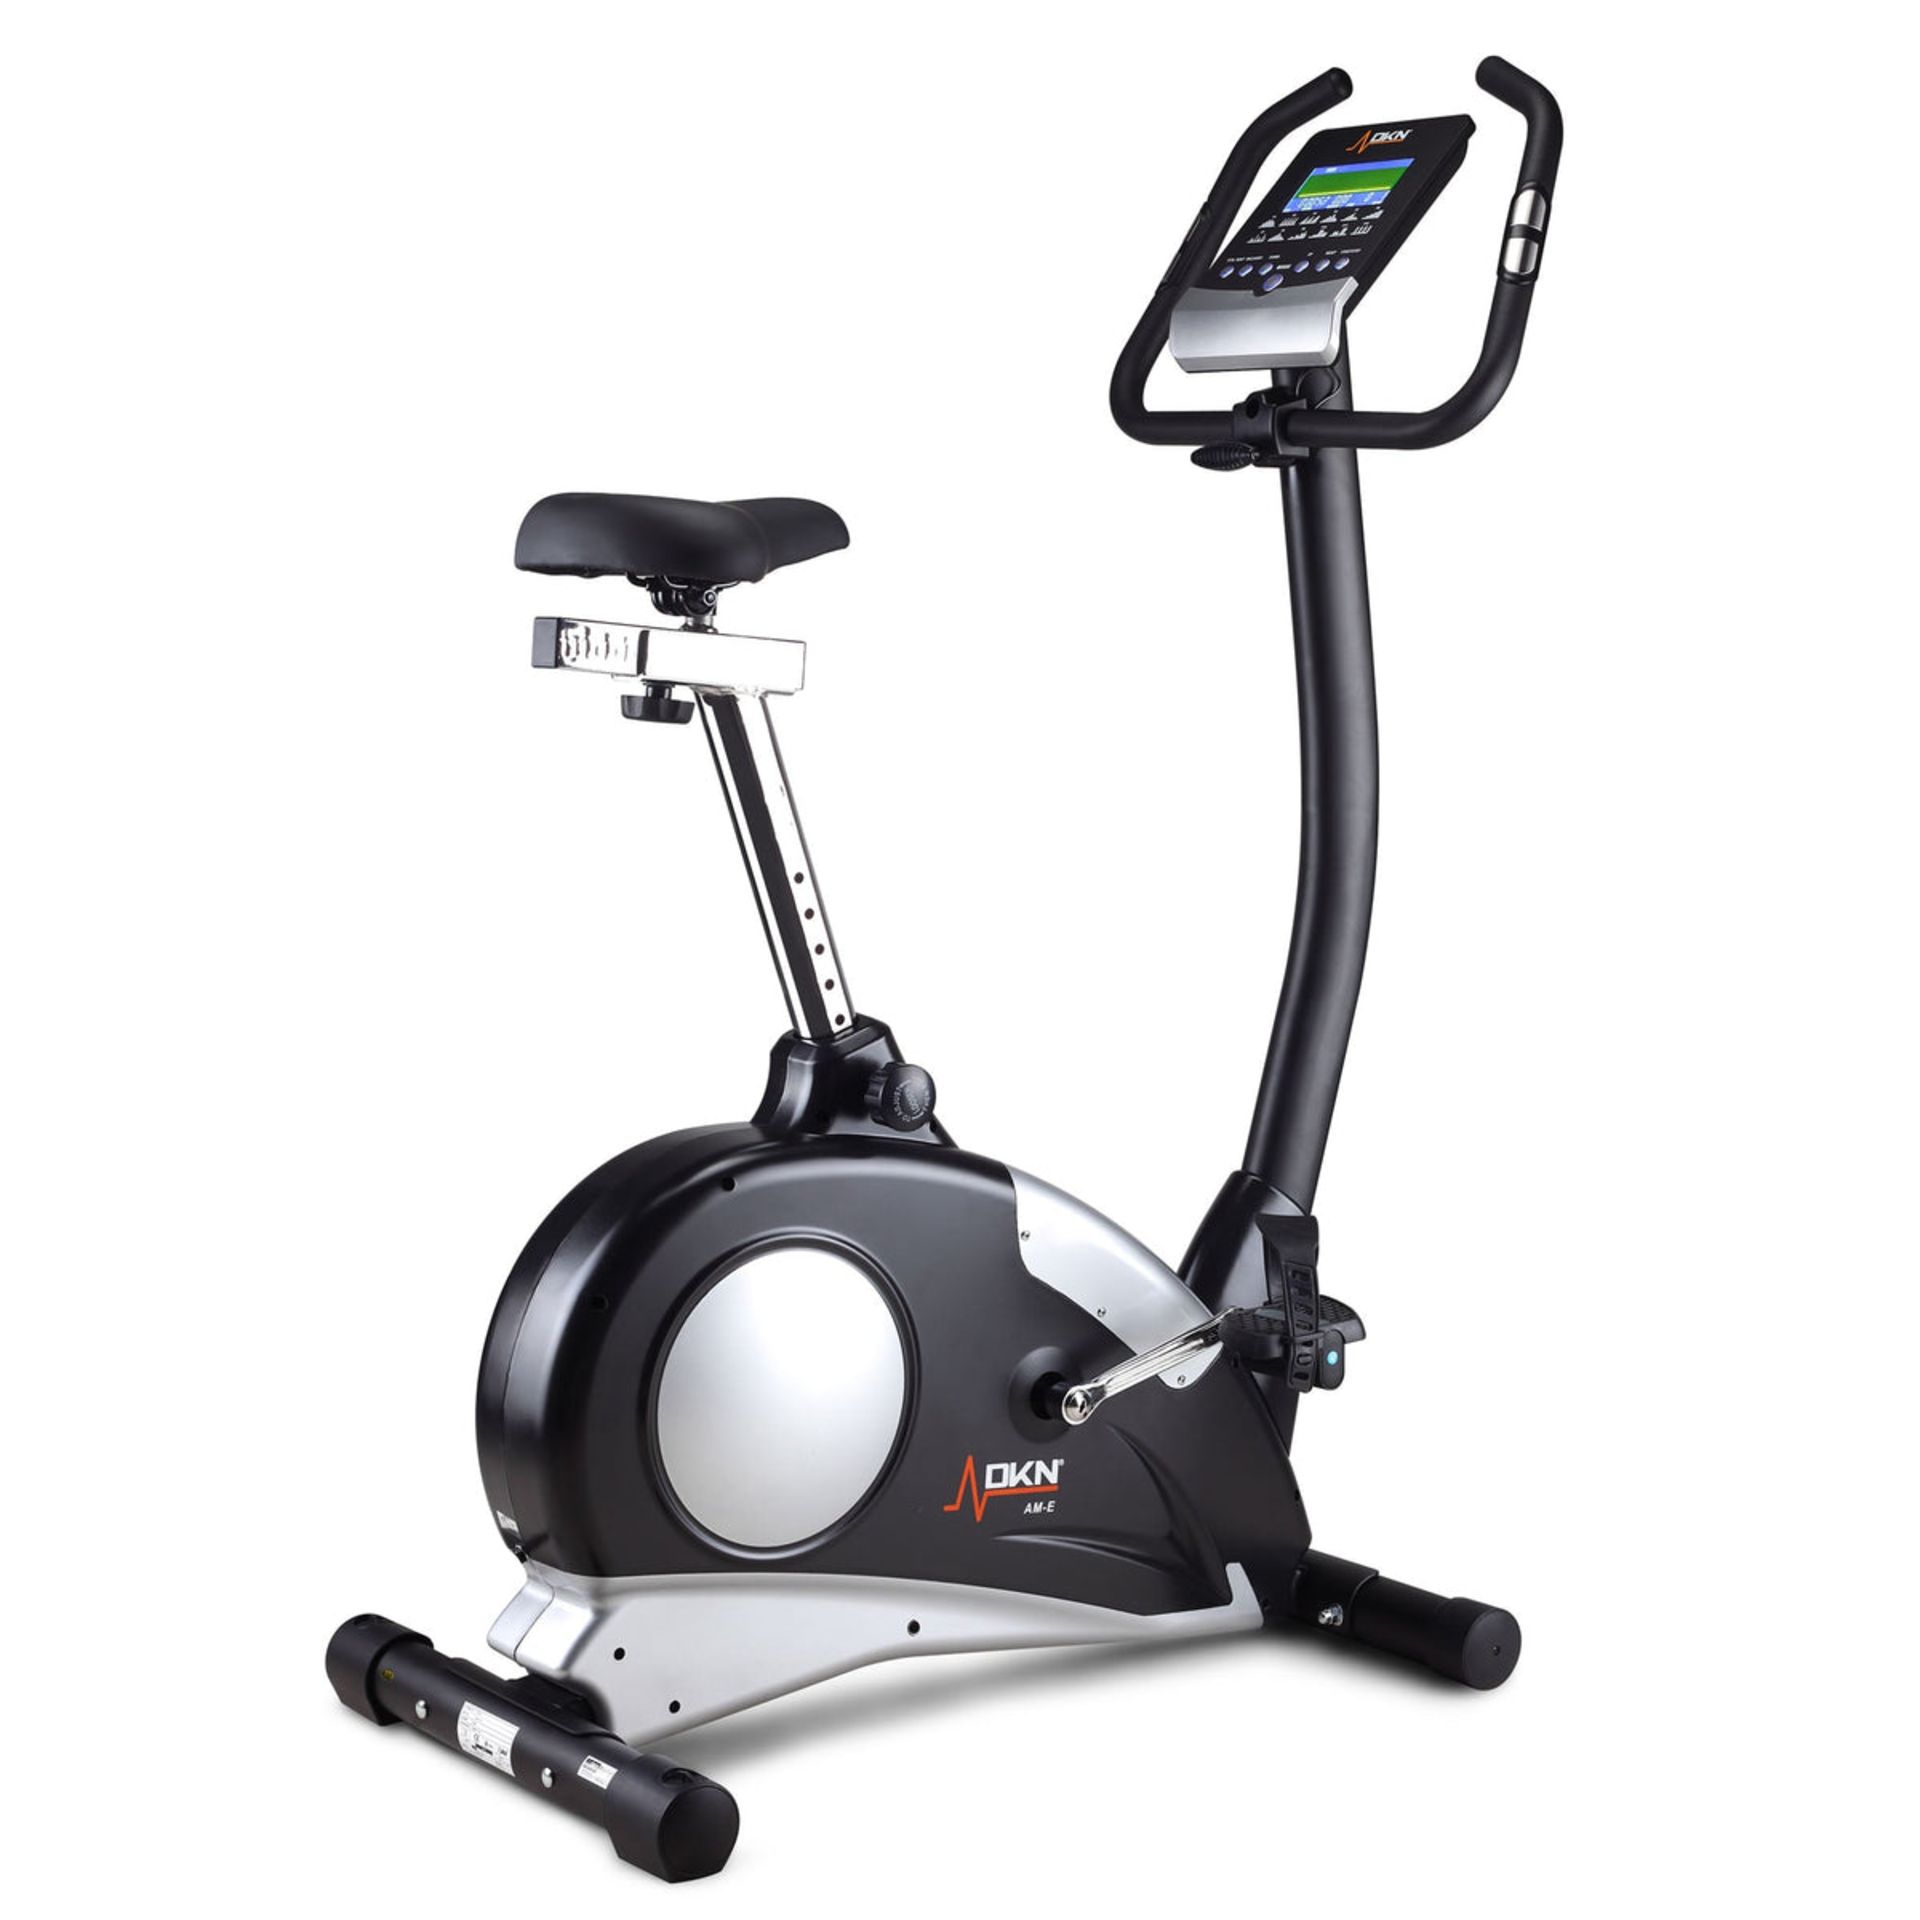 Sweatband DKN Ergometer AM-E Exercise Bike - Black RRP 229.00 About the Product(s) DKN AM-E Exercise